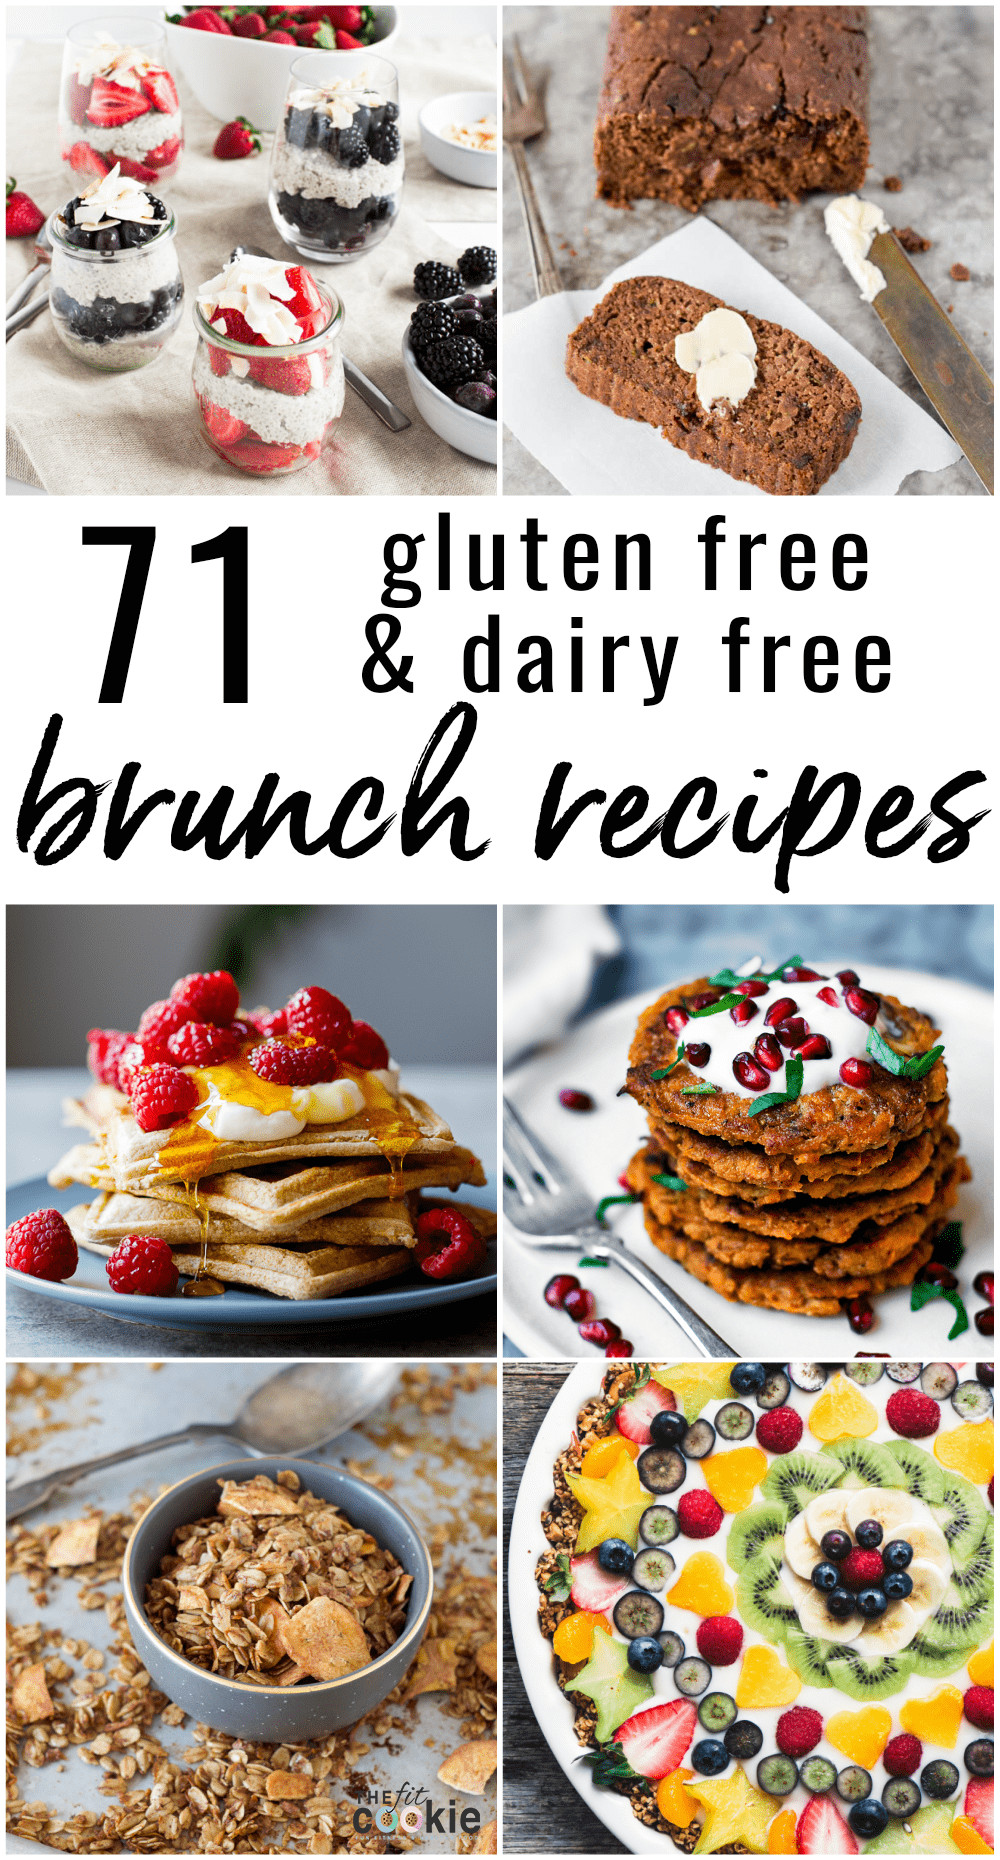 Gluten Free Brunch Recipes
 71 Gluten Free and Dairy Free Brunch Recipes • The Fit Cookie